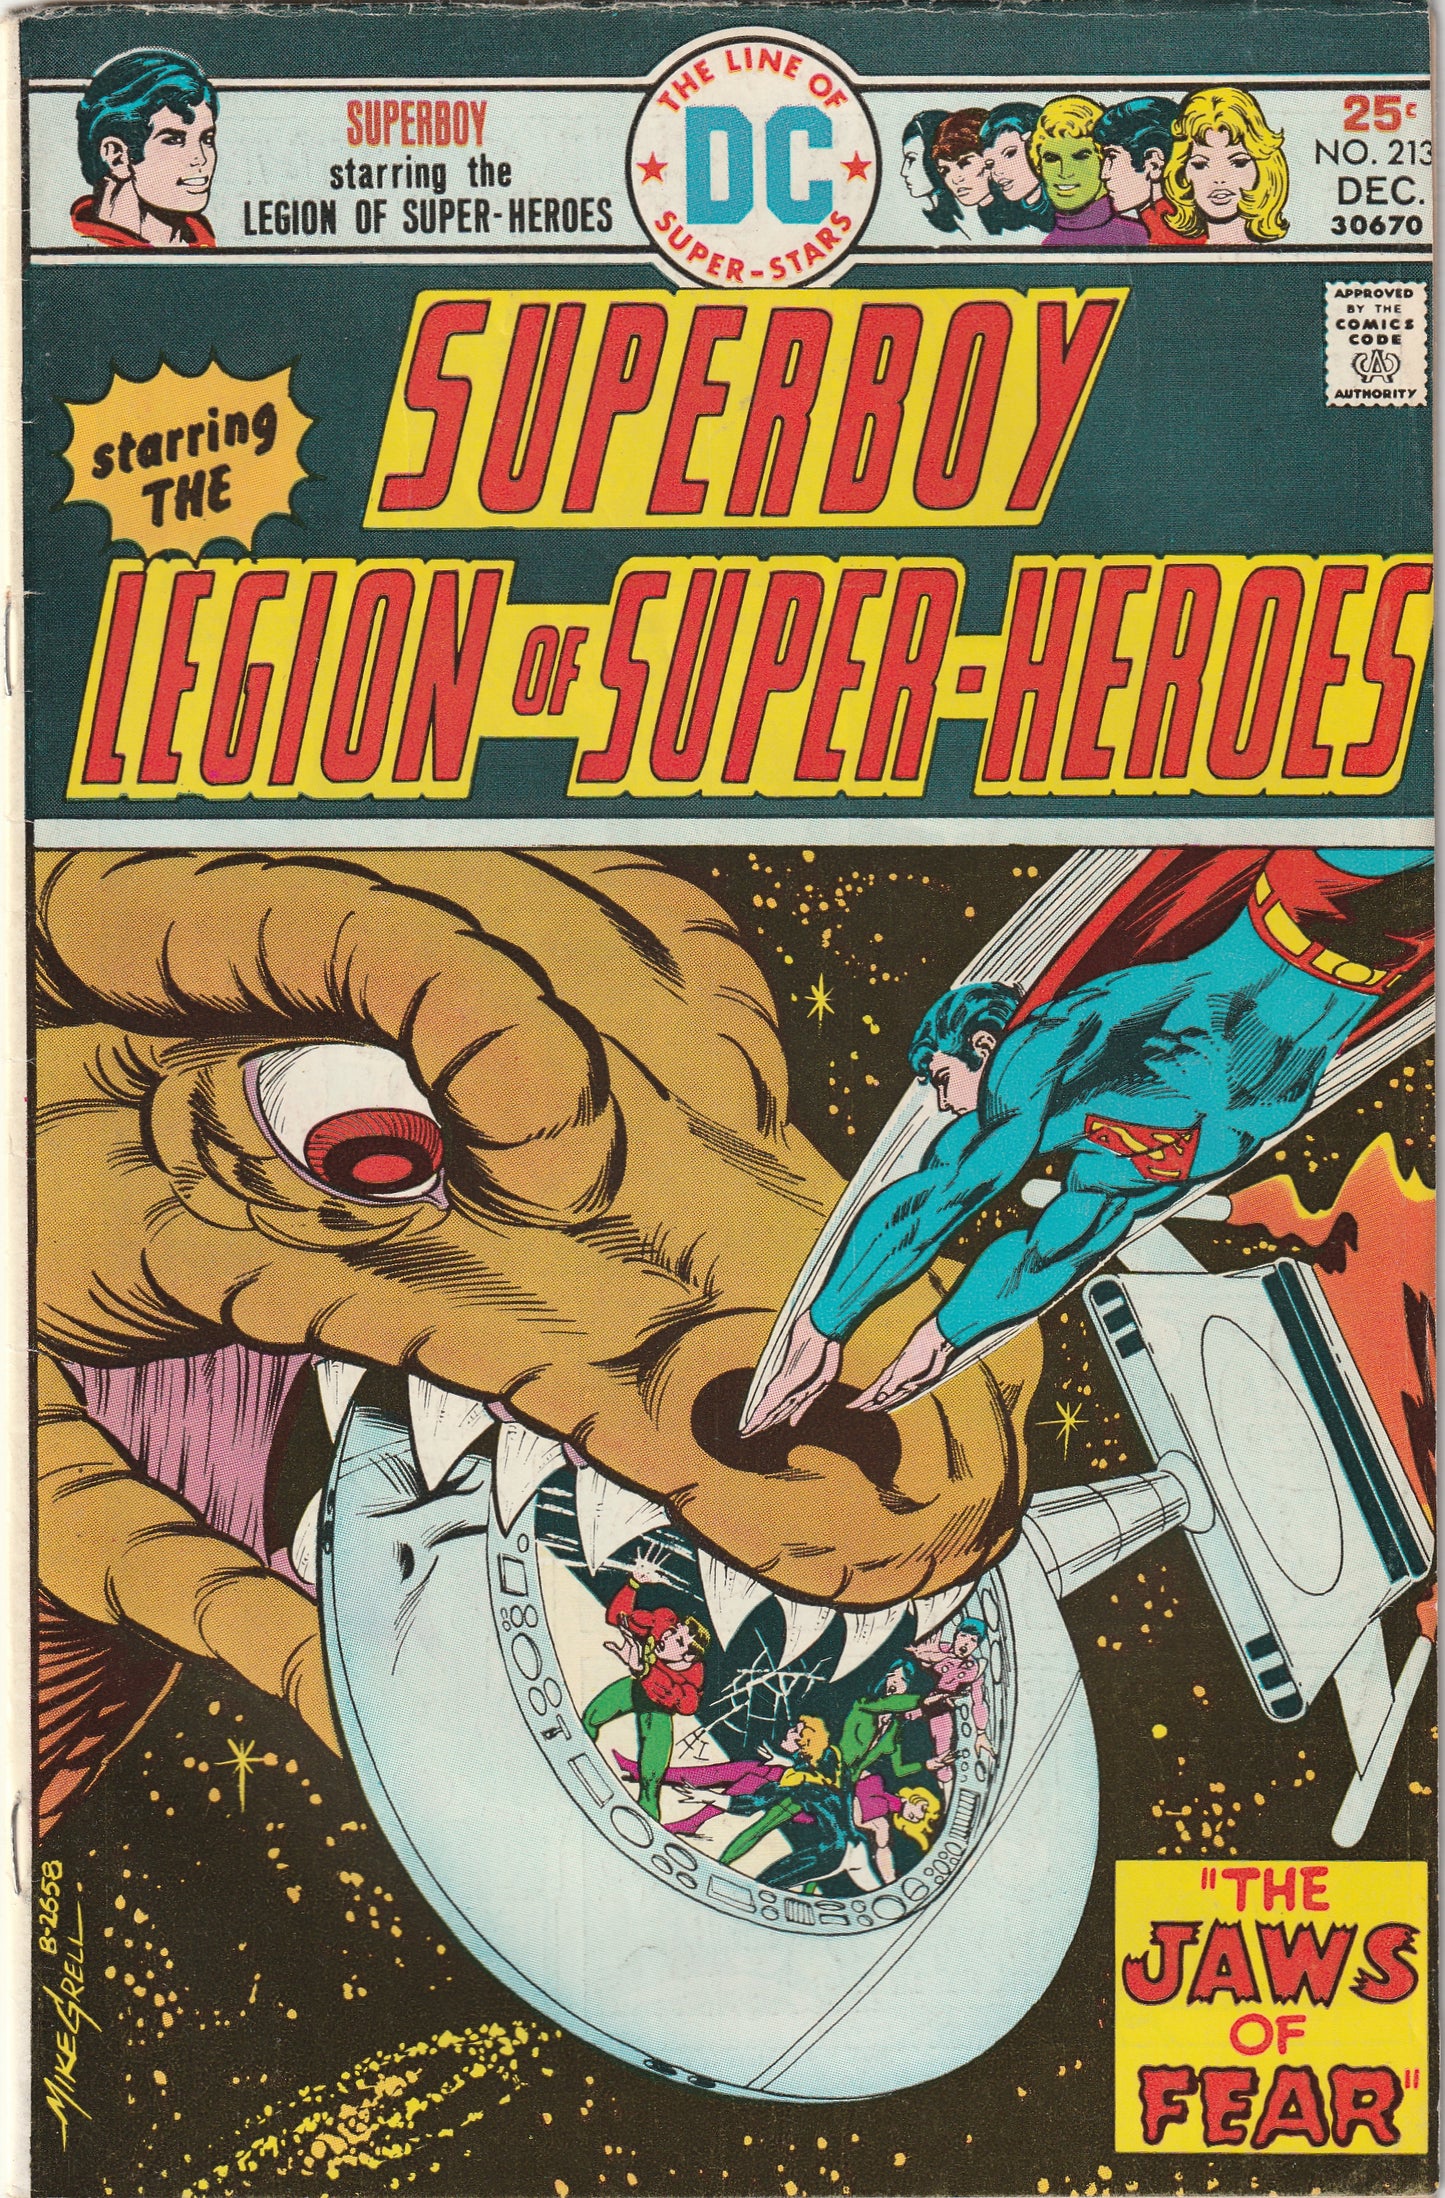 Superboy #213 (1975) - Starring the Legion of Super-Heroes